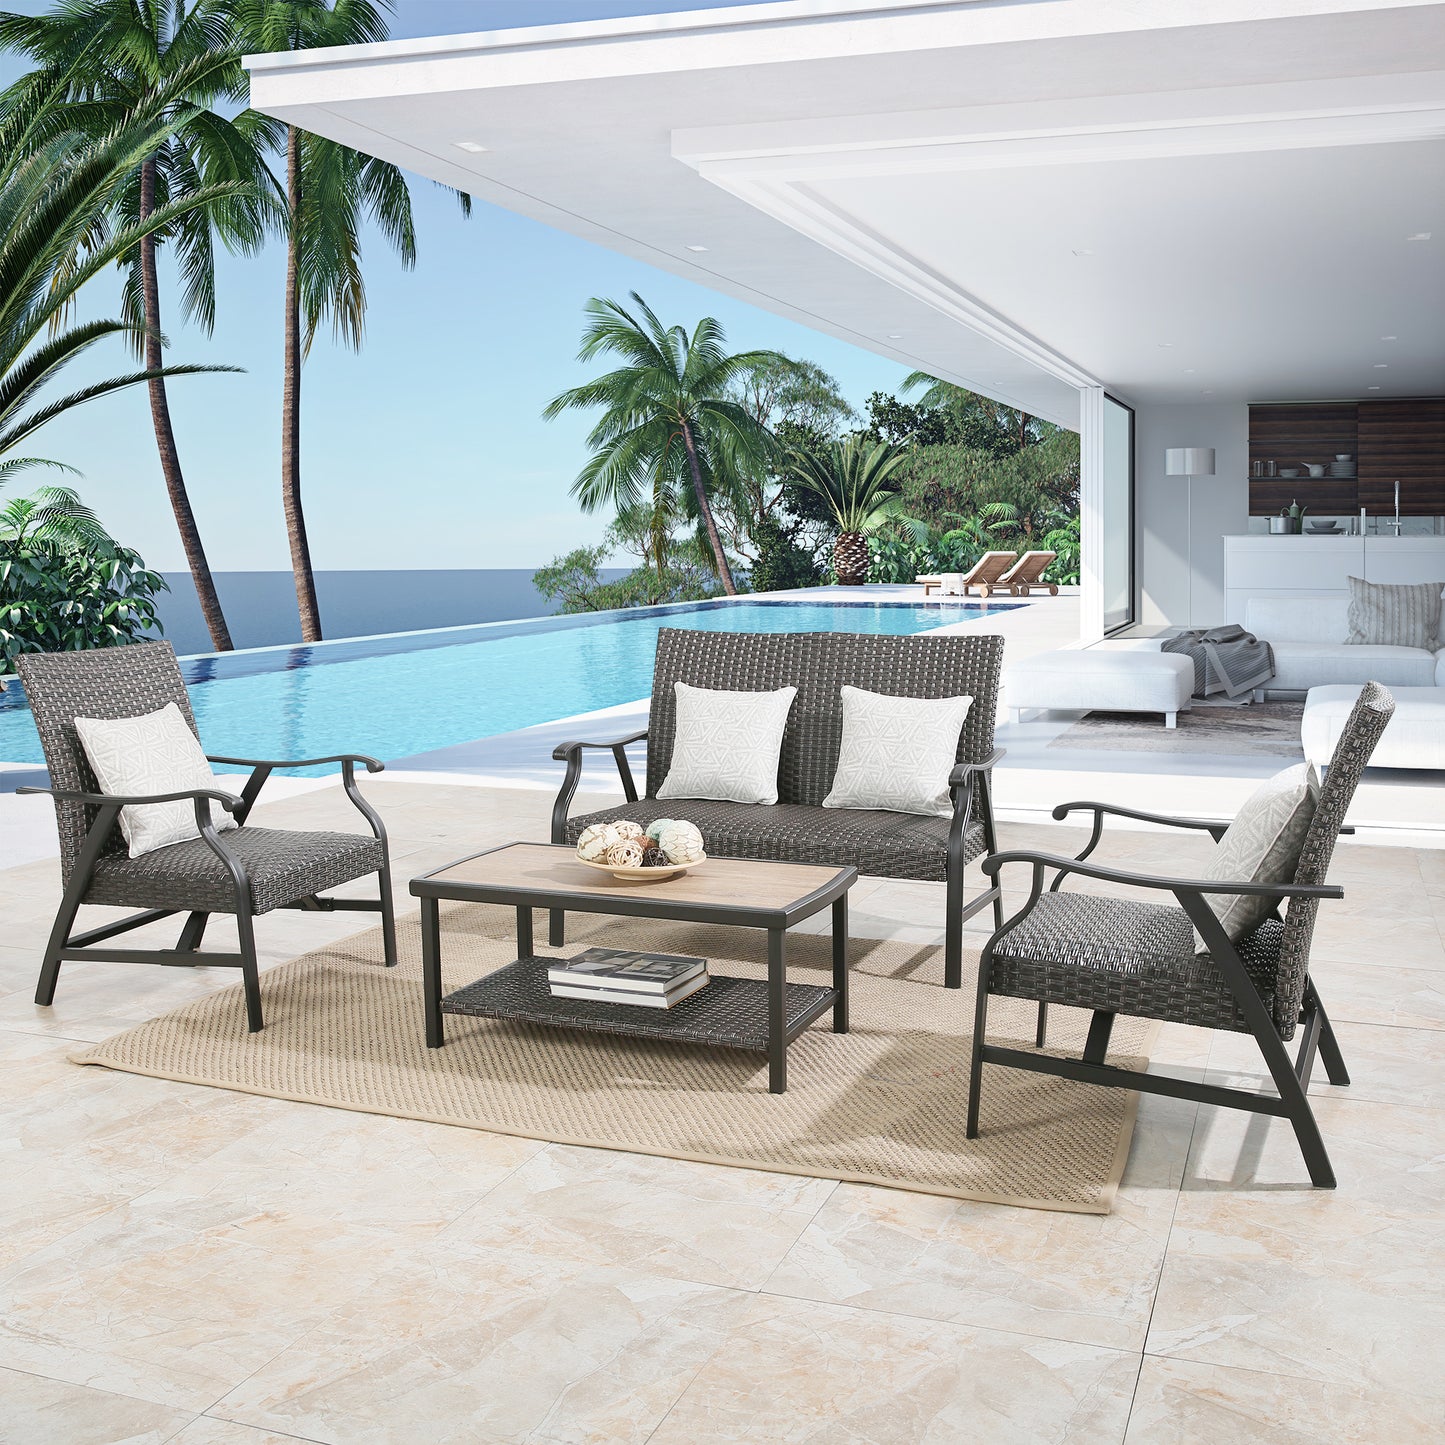 4-Piece Indoor Outdoor Wicker Padded Conversation Set Patio Rattan Furniture Set with 2 Motion Rocking Armchairs, 1 Loveseat and 1 Alucobond Coffee Table for 4 Persons